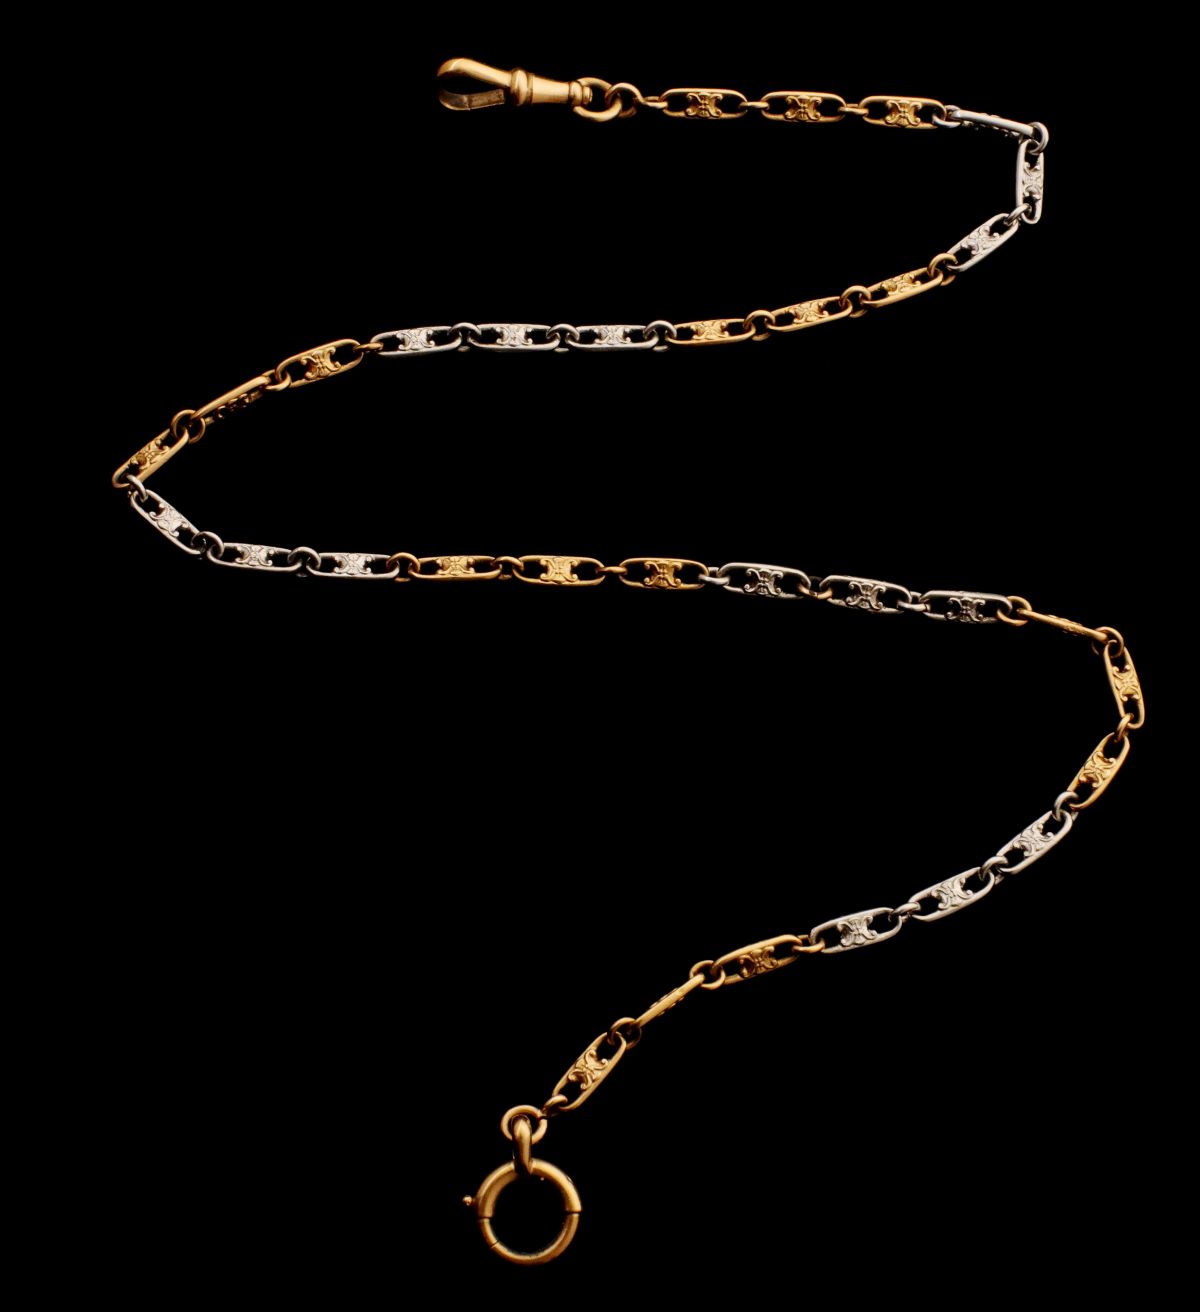 AN EARLY 20TH C. 18K GOLD AND PLATINUM WATCH CHAIN